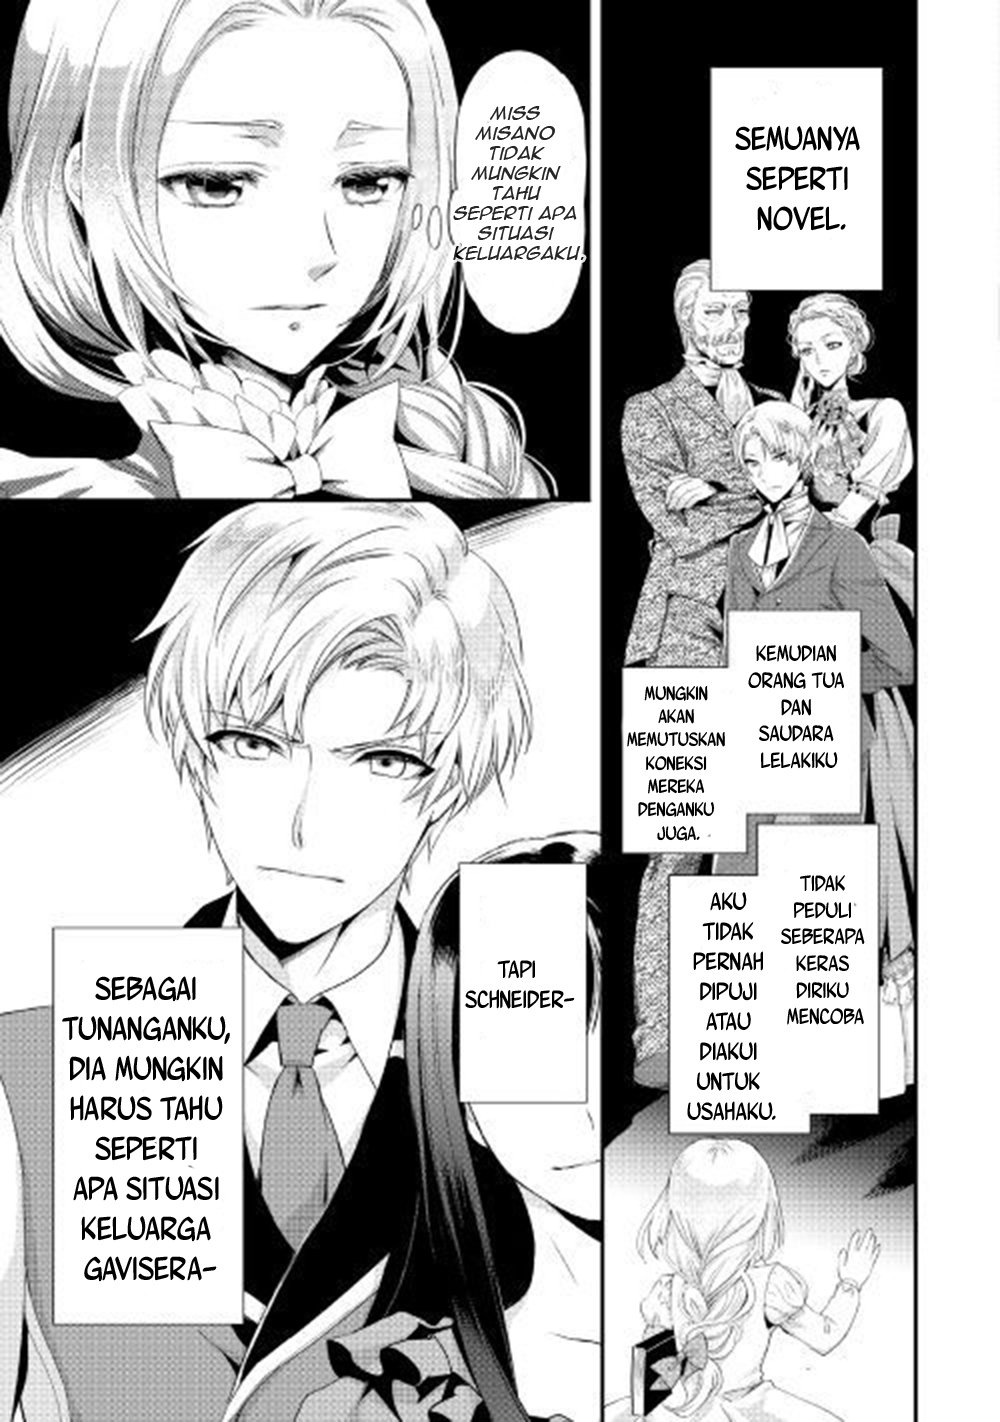 Milady Just Wants to Relax Chapter 01